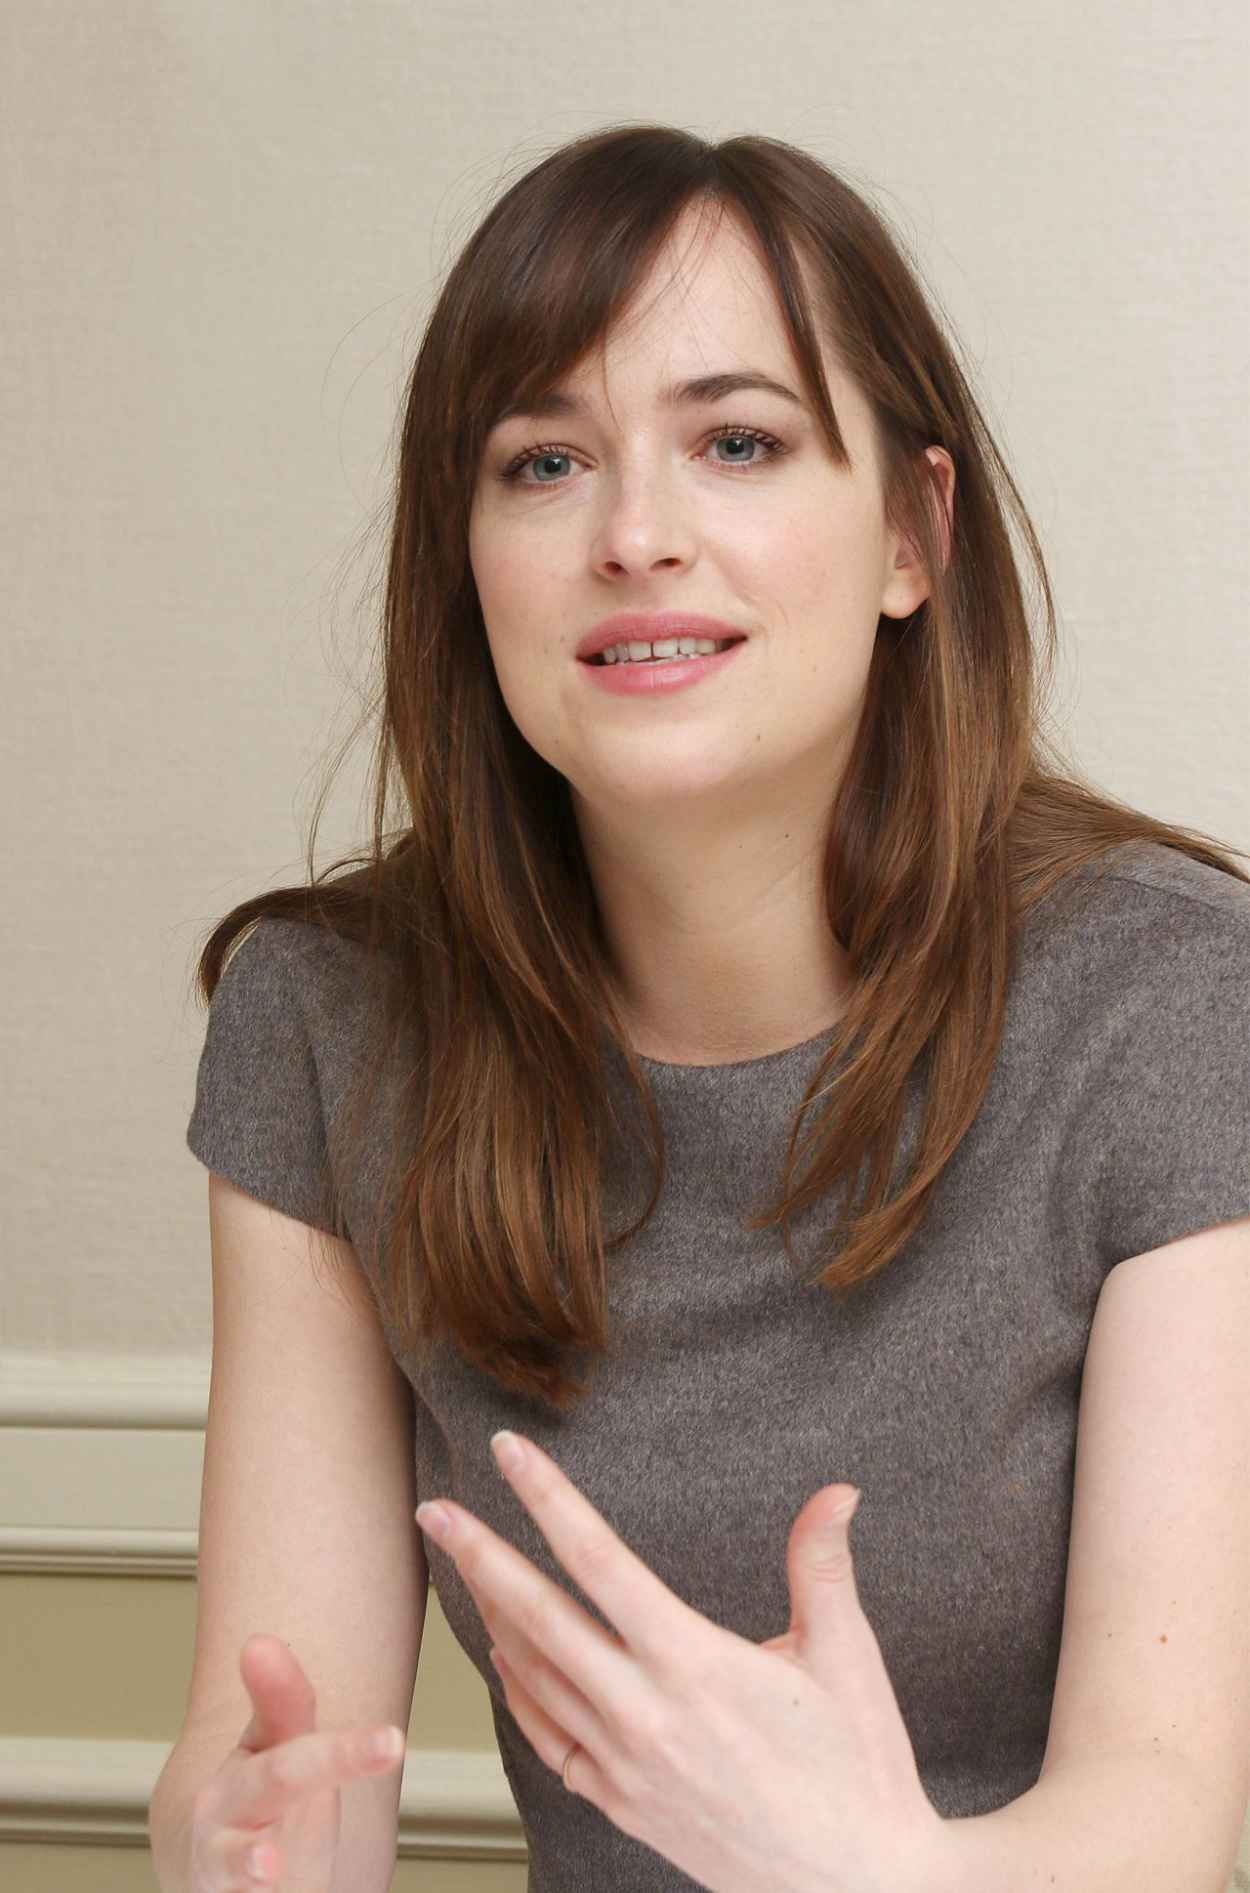 Dakota Johnson Fifty Shades Of Grey Press Conference At Four Seasons Hotel In Los Angeles 